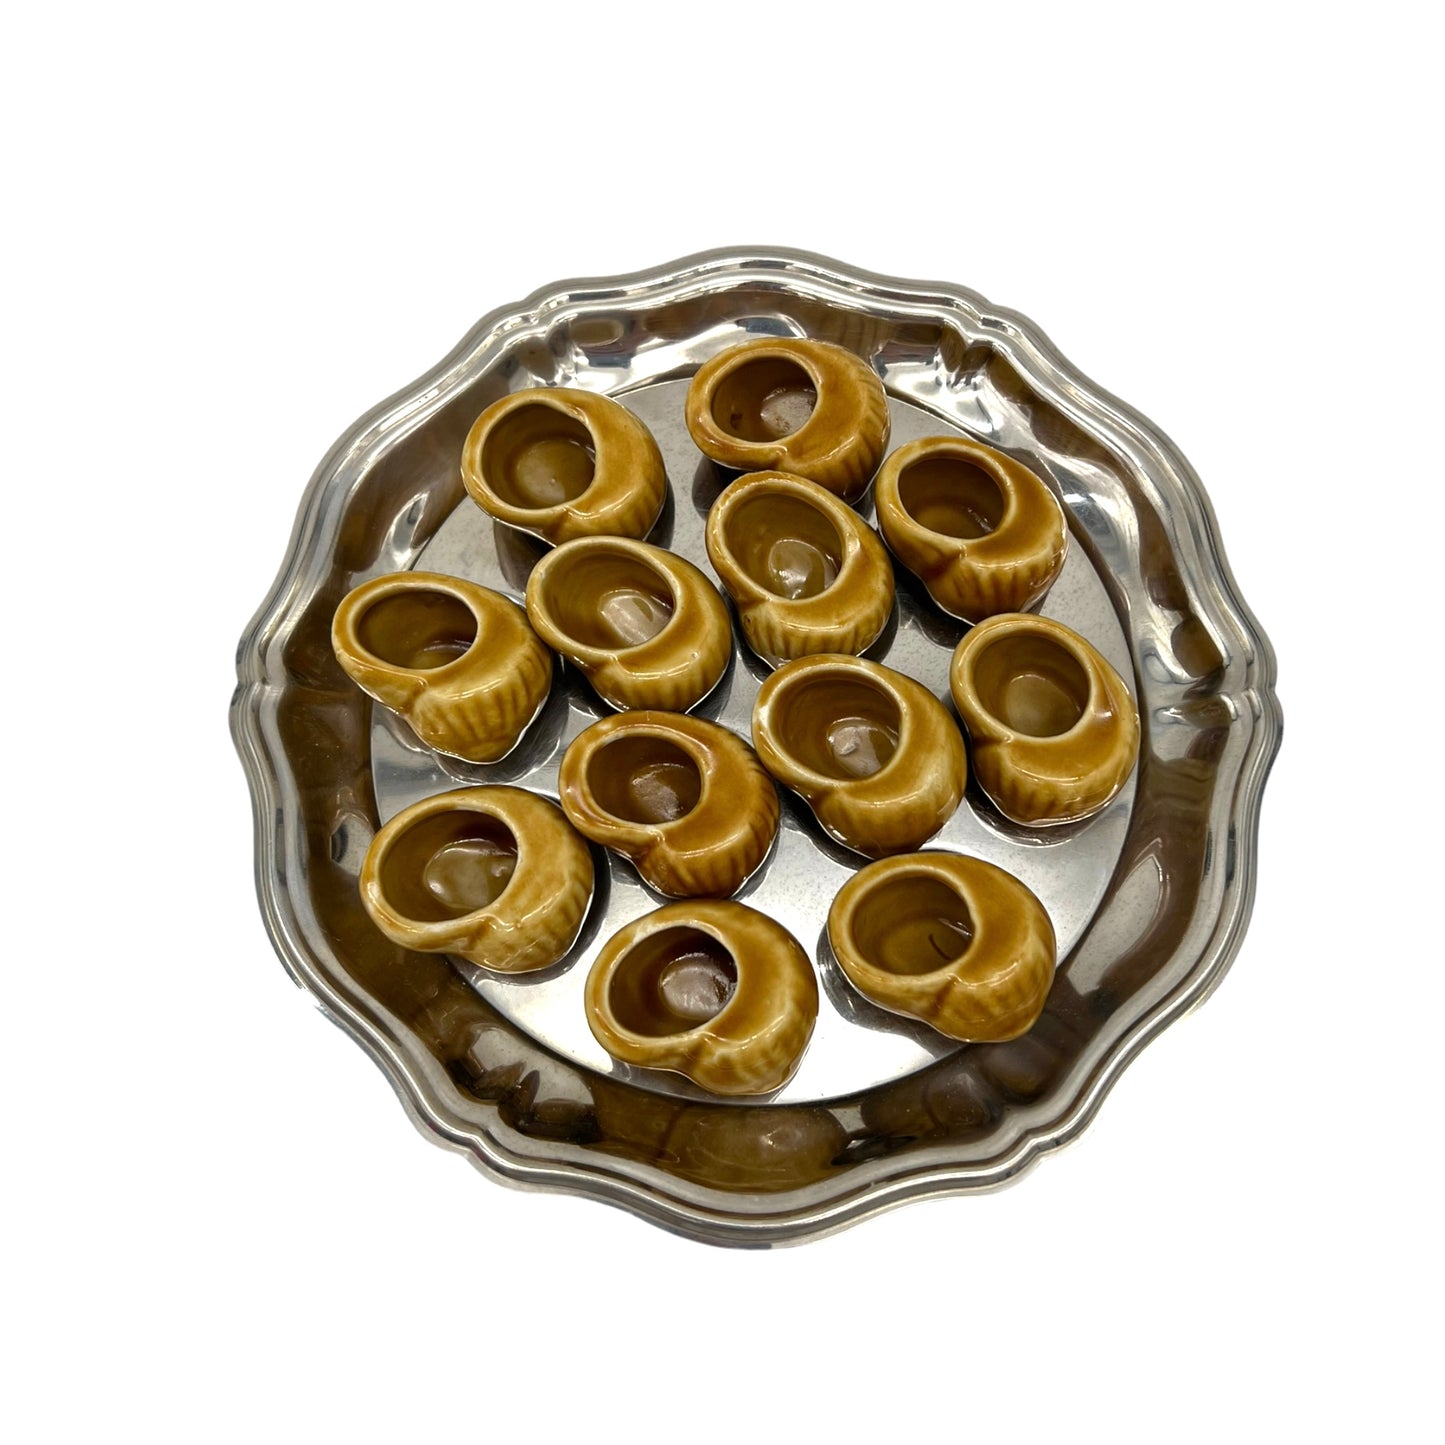 12 French beige ceramic snail pots on a silver tray with a white background sold by All Things French Store